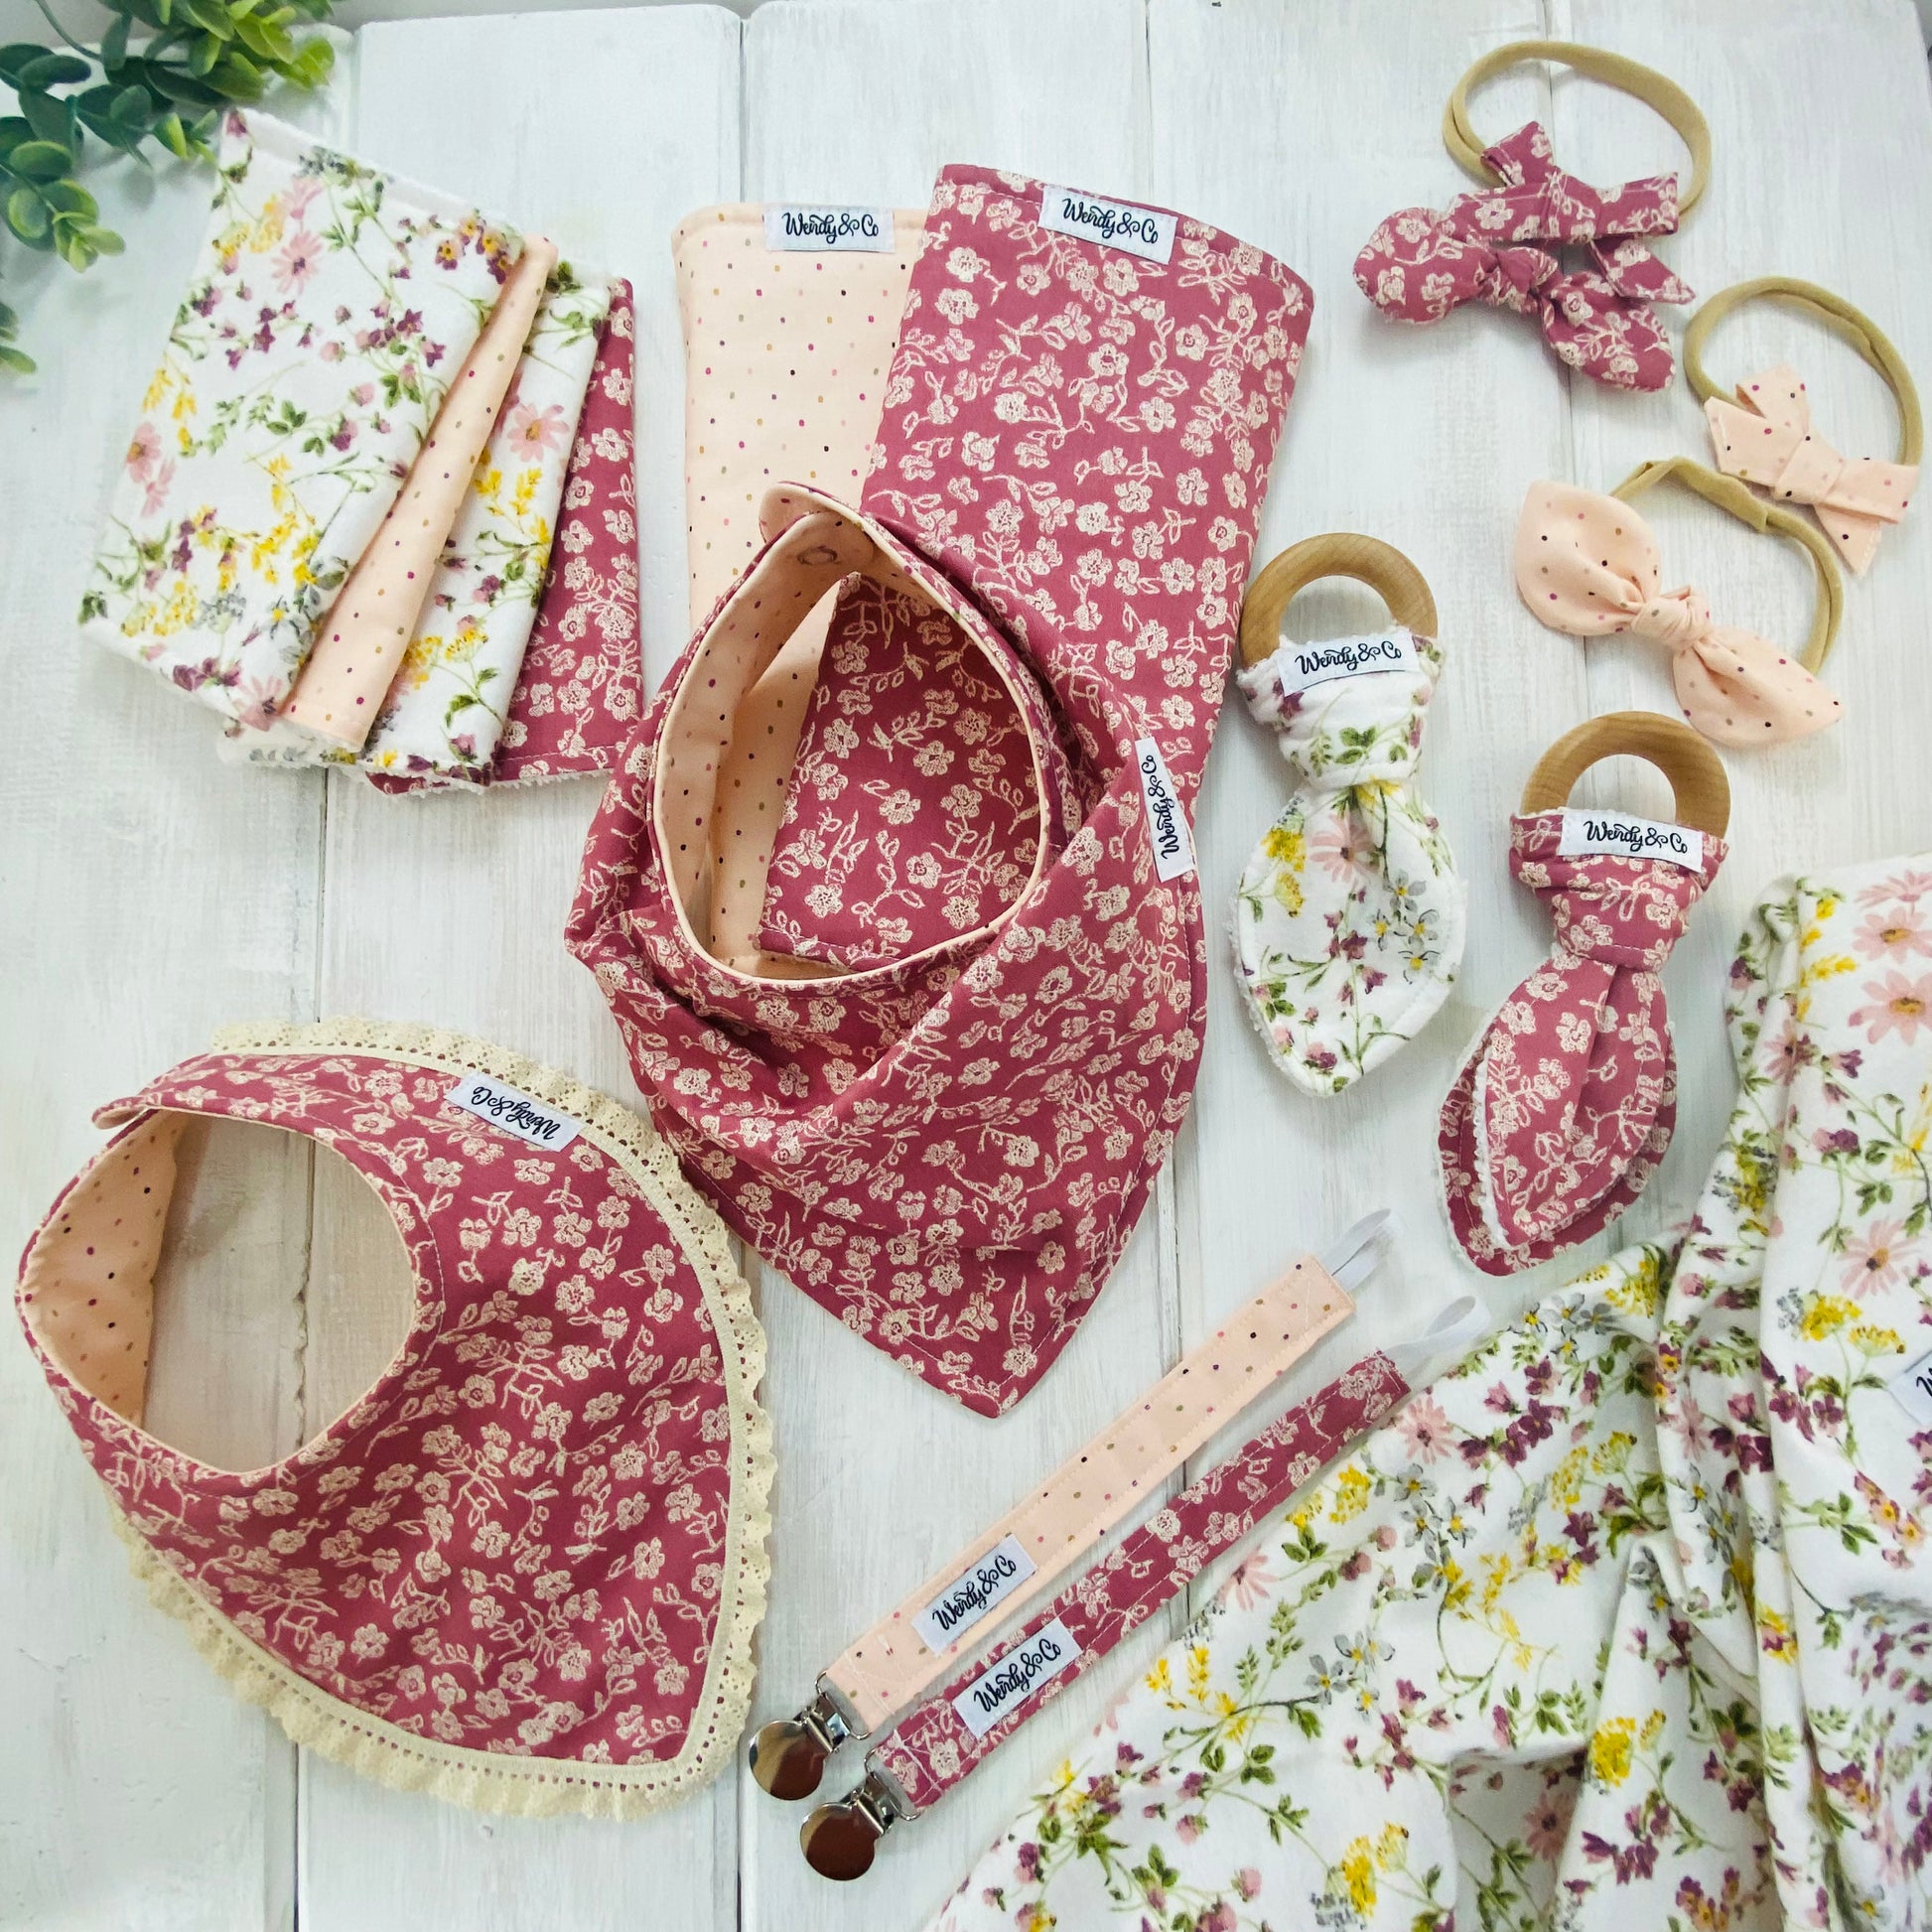 Vintage handmade baby layette in pink and cream florals.